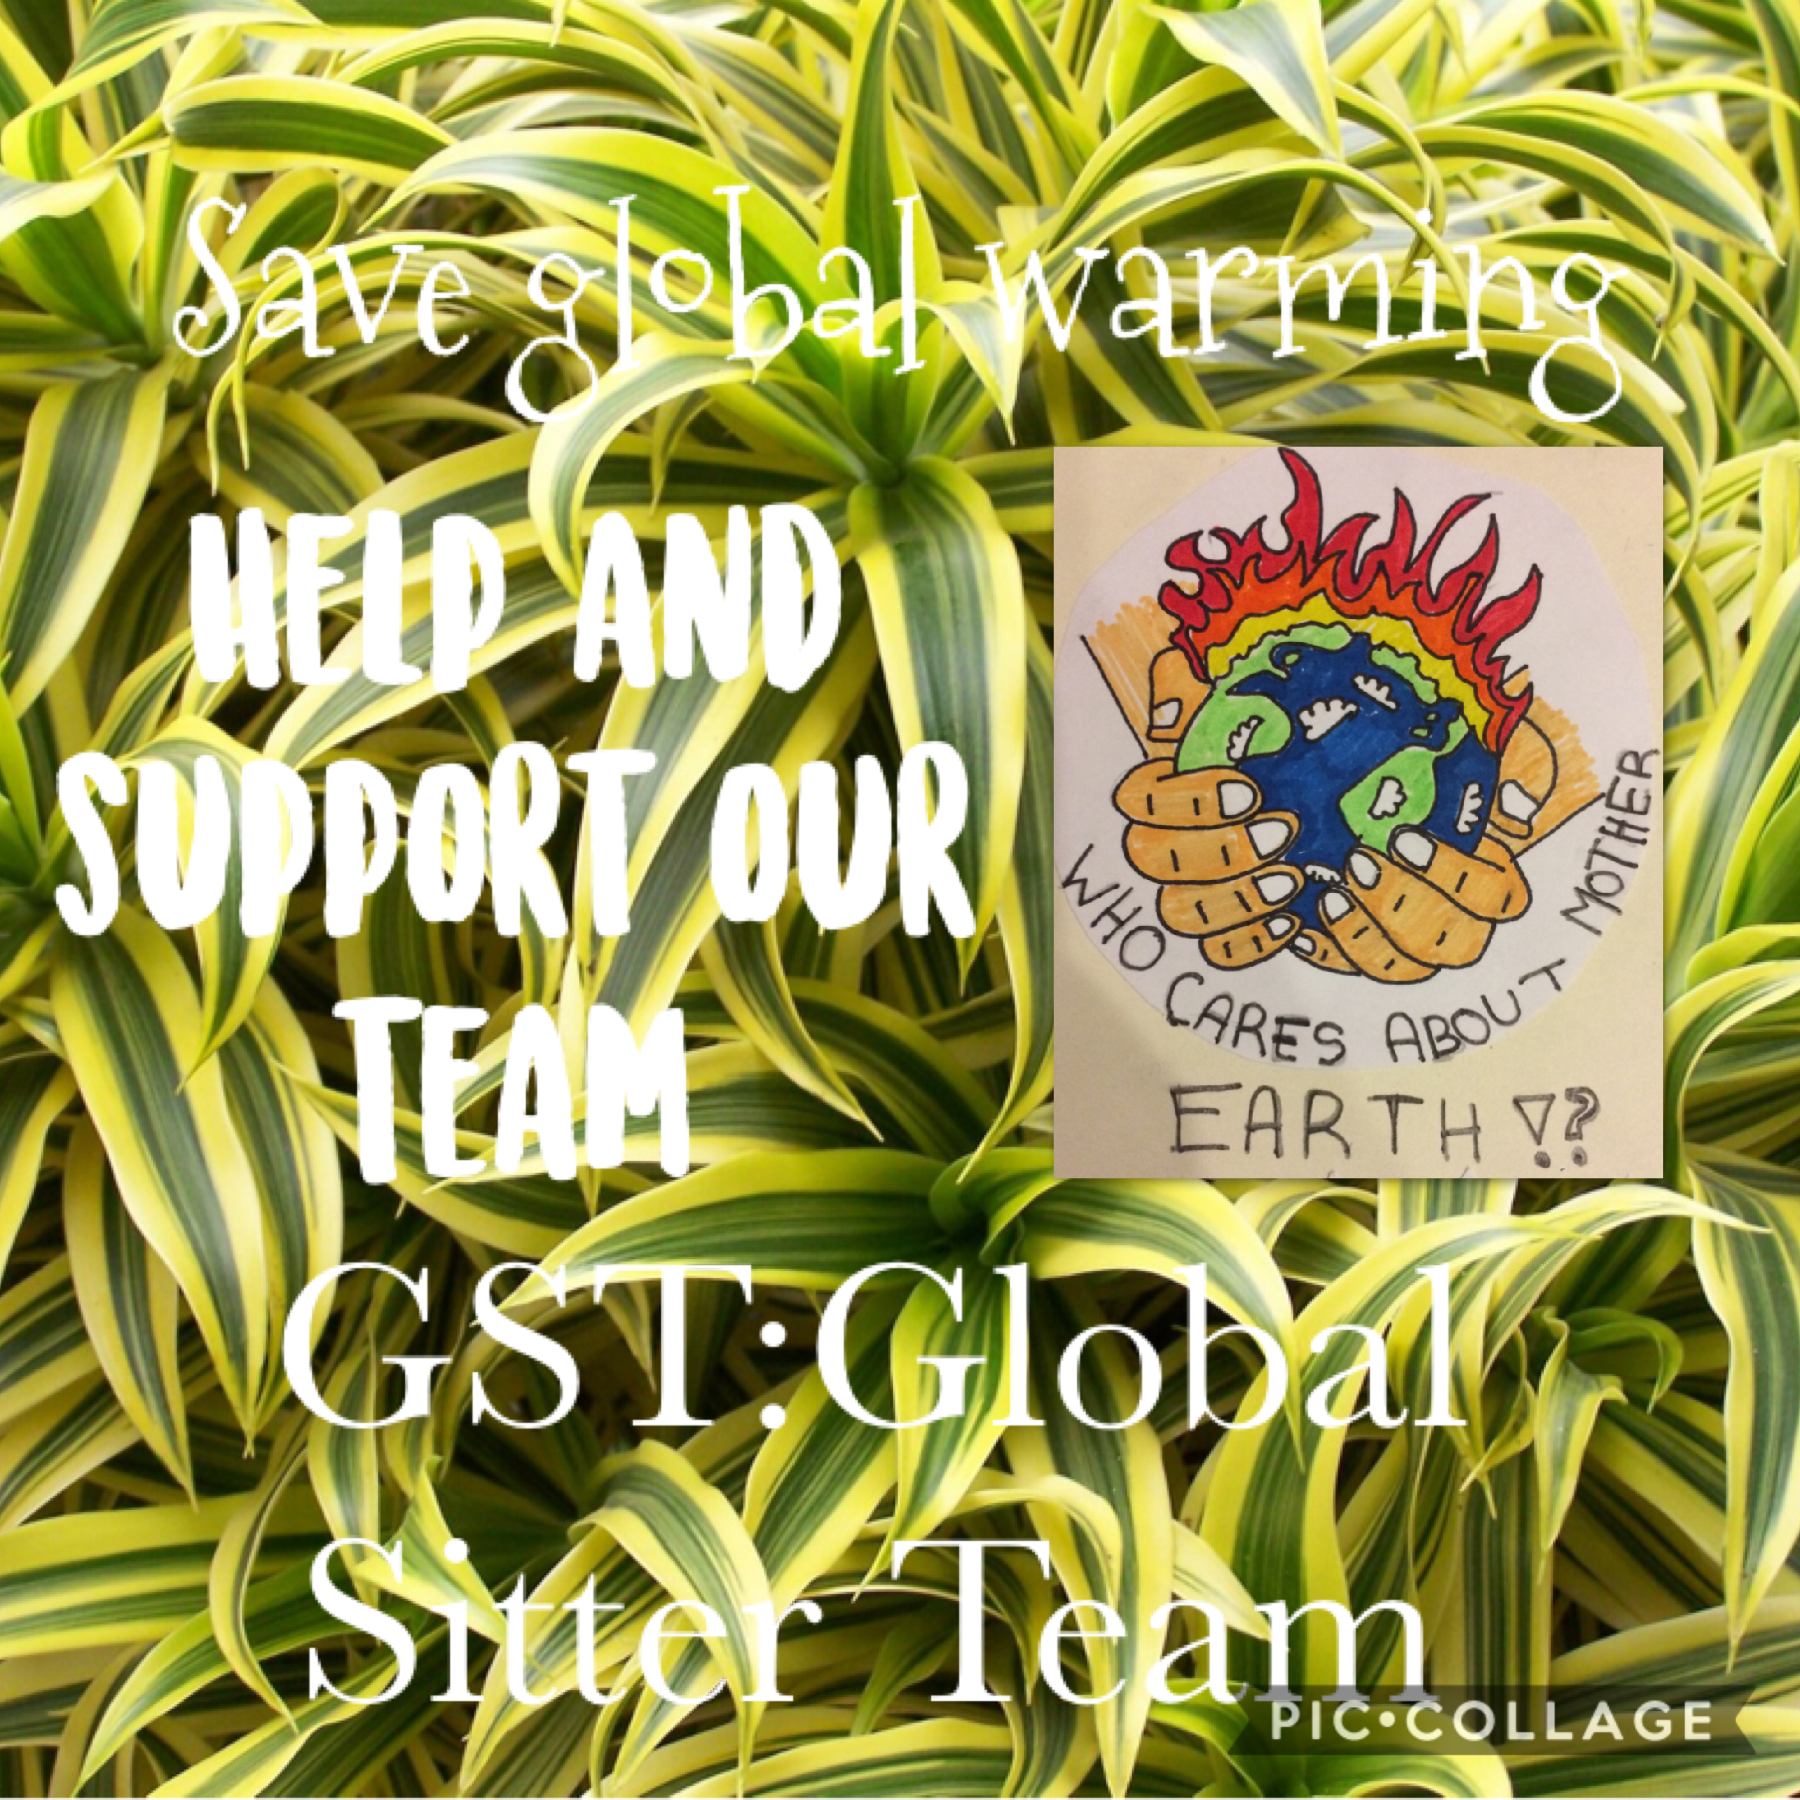 We created a group on picolage and it is called globalsitterteam4 and we are here to stop global warming, stop wasting plastic and polluting. Comme and look! 